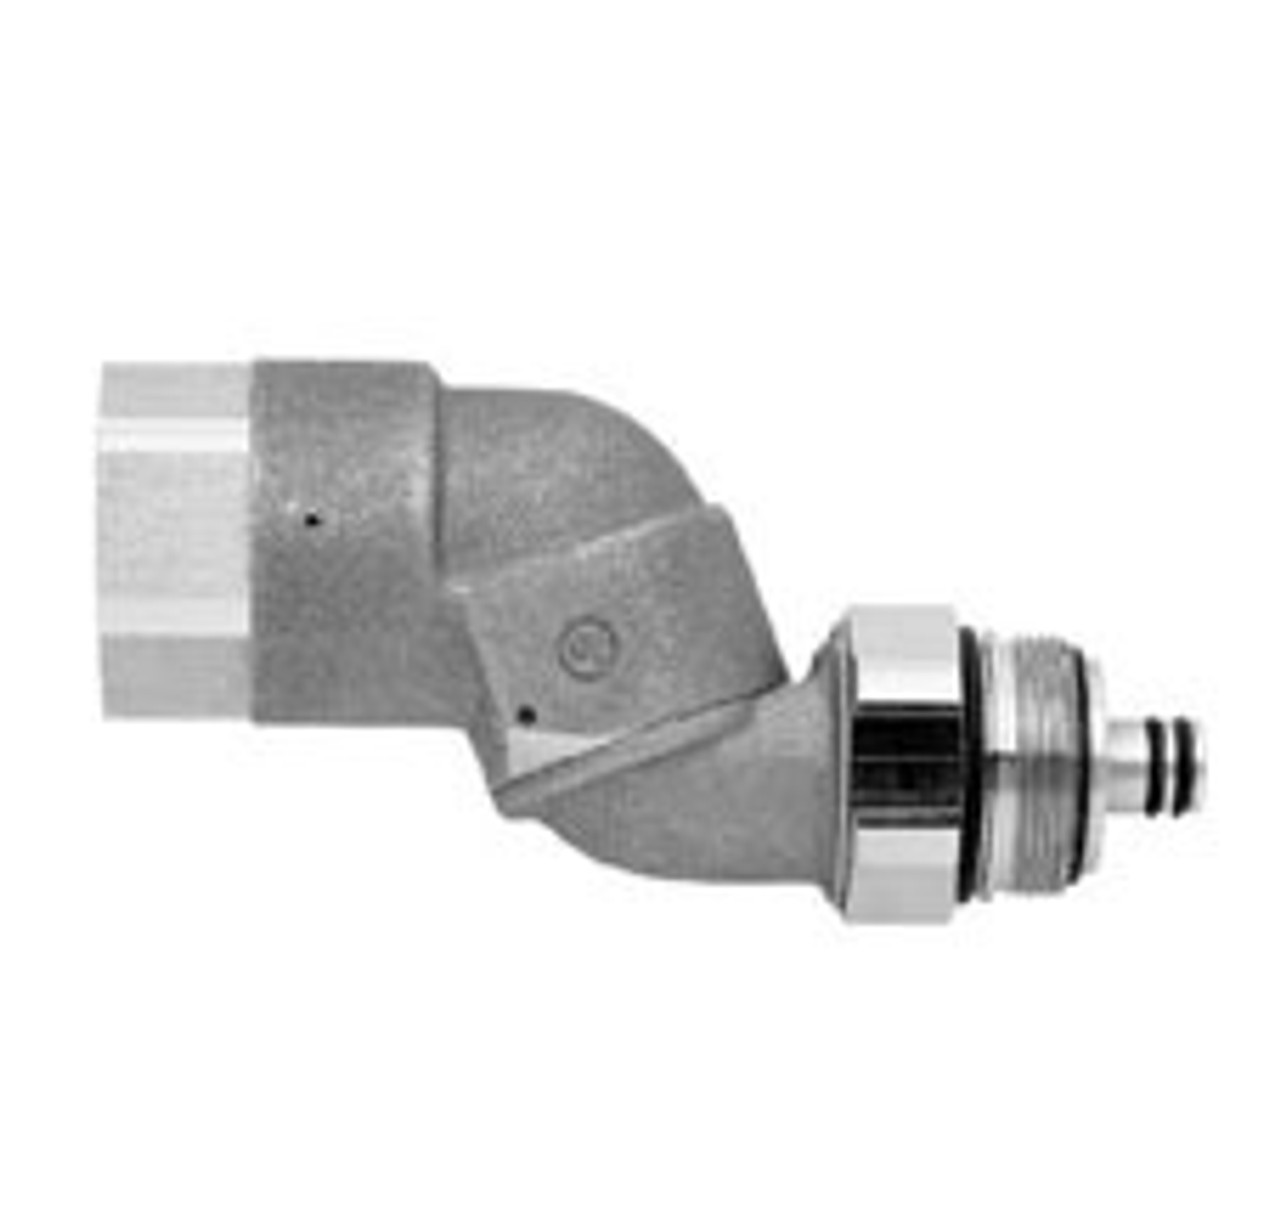 Franklin Fueling Systems 2 in. NPT Anti-Siphon Valve for Above Ground Tank  - John M. Ellsworth Co. Inc.